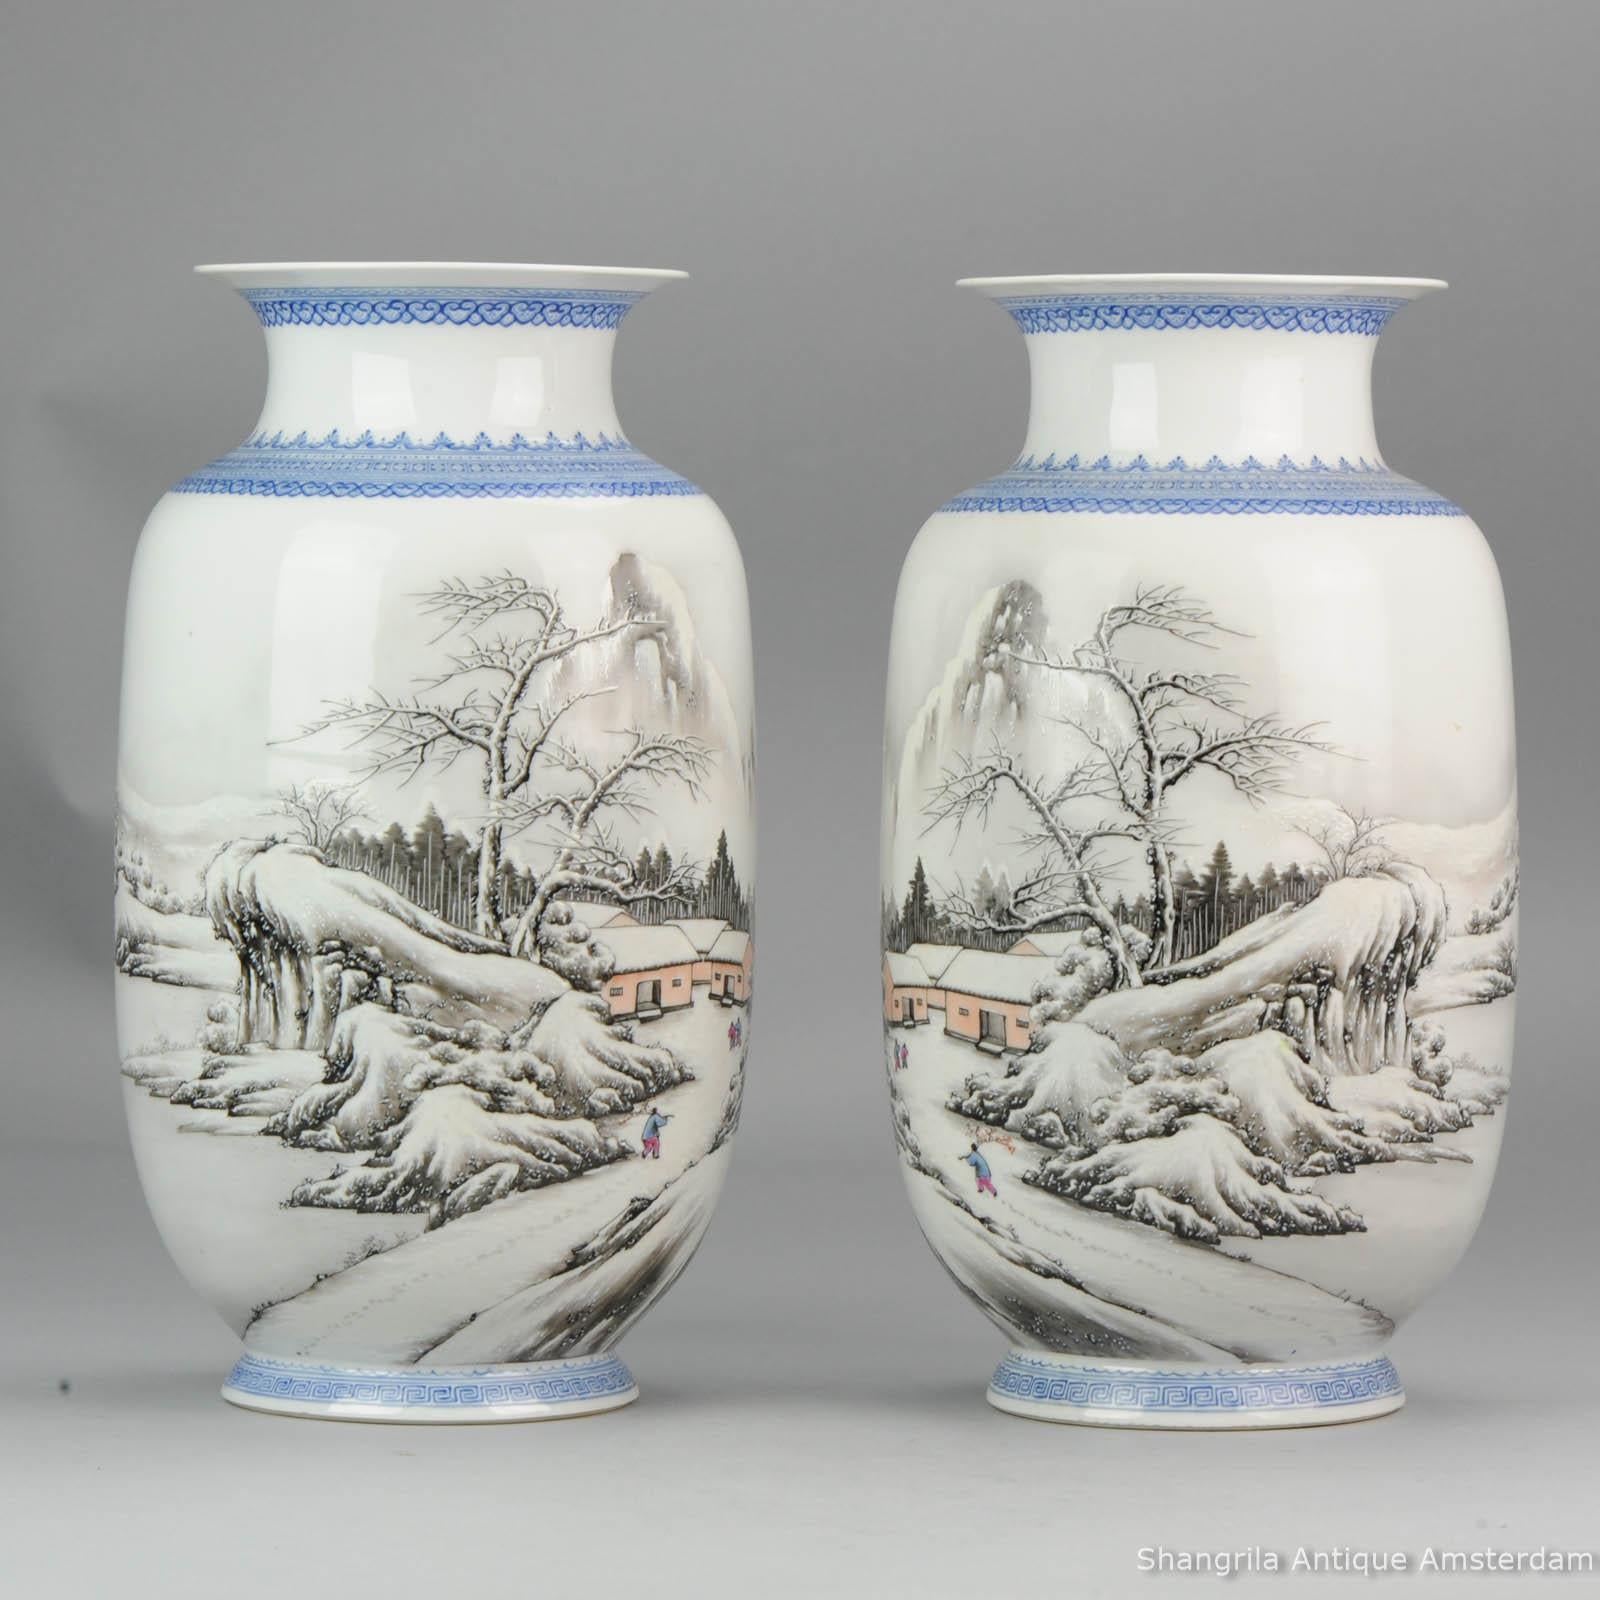 20th Century High Quality 1950-1960 Qianlong Marked Chinese Porcelain Vase PRoC Winter Land For Sale